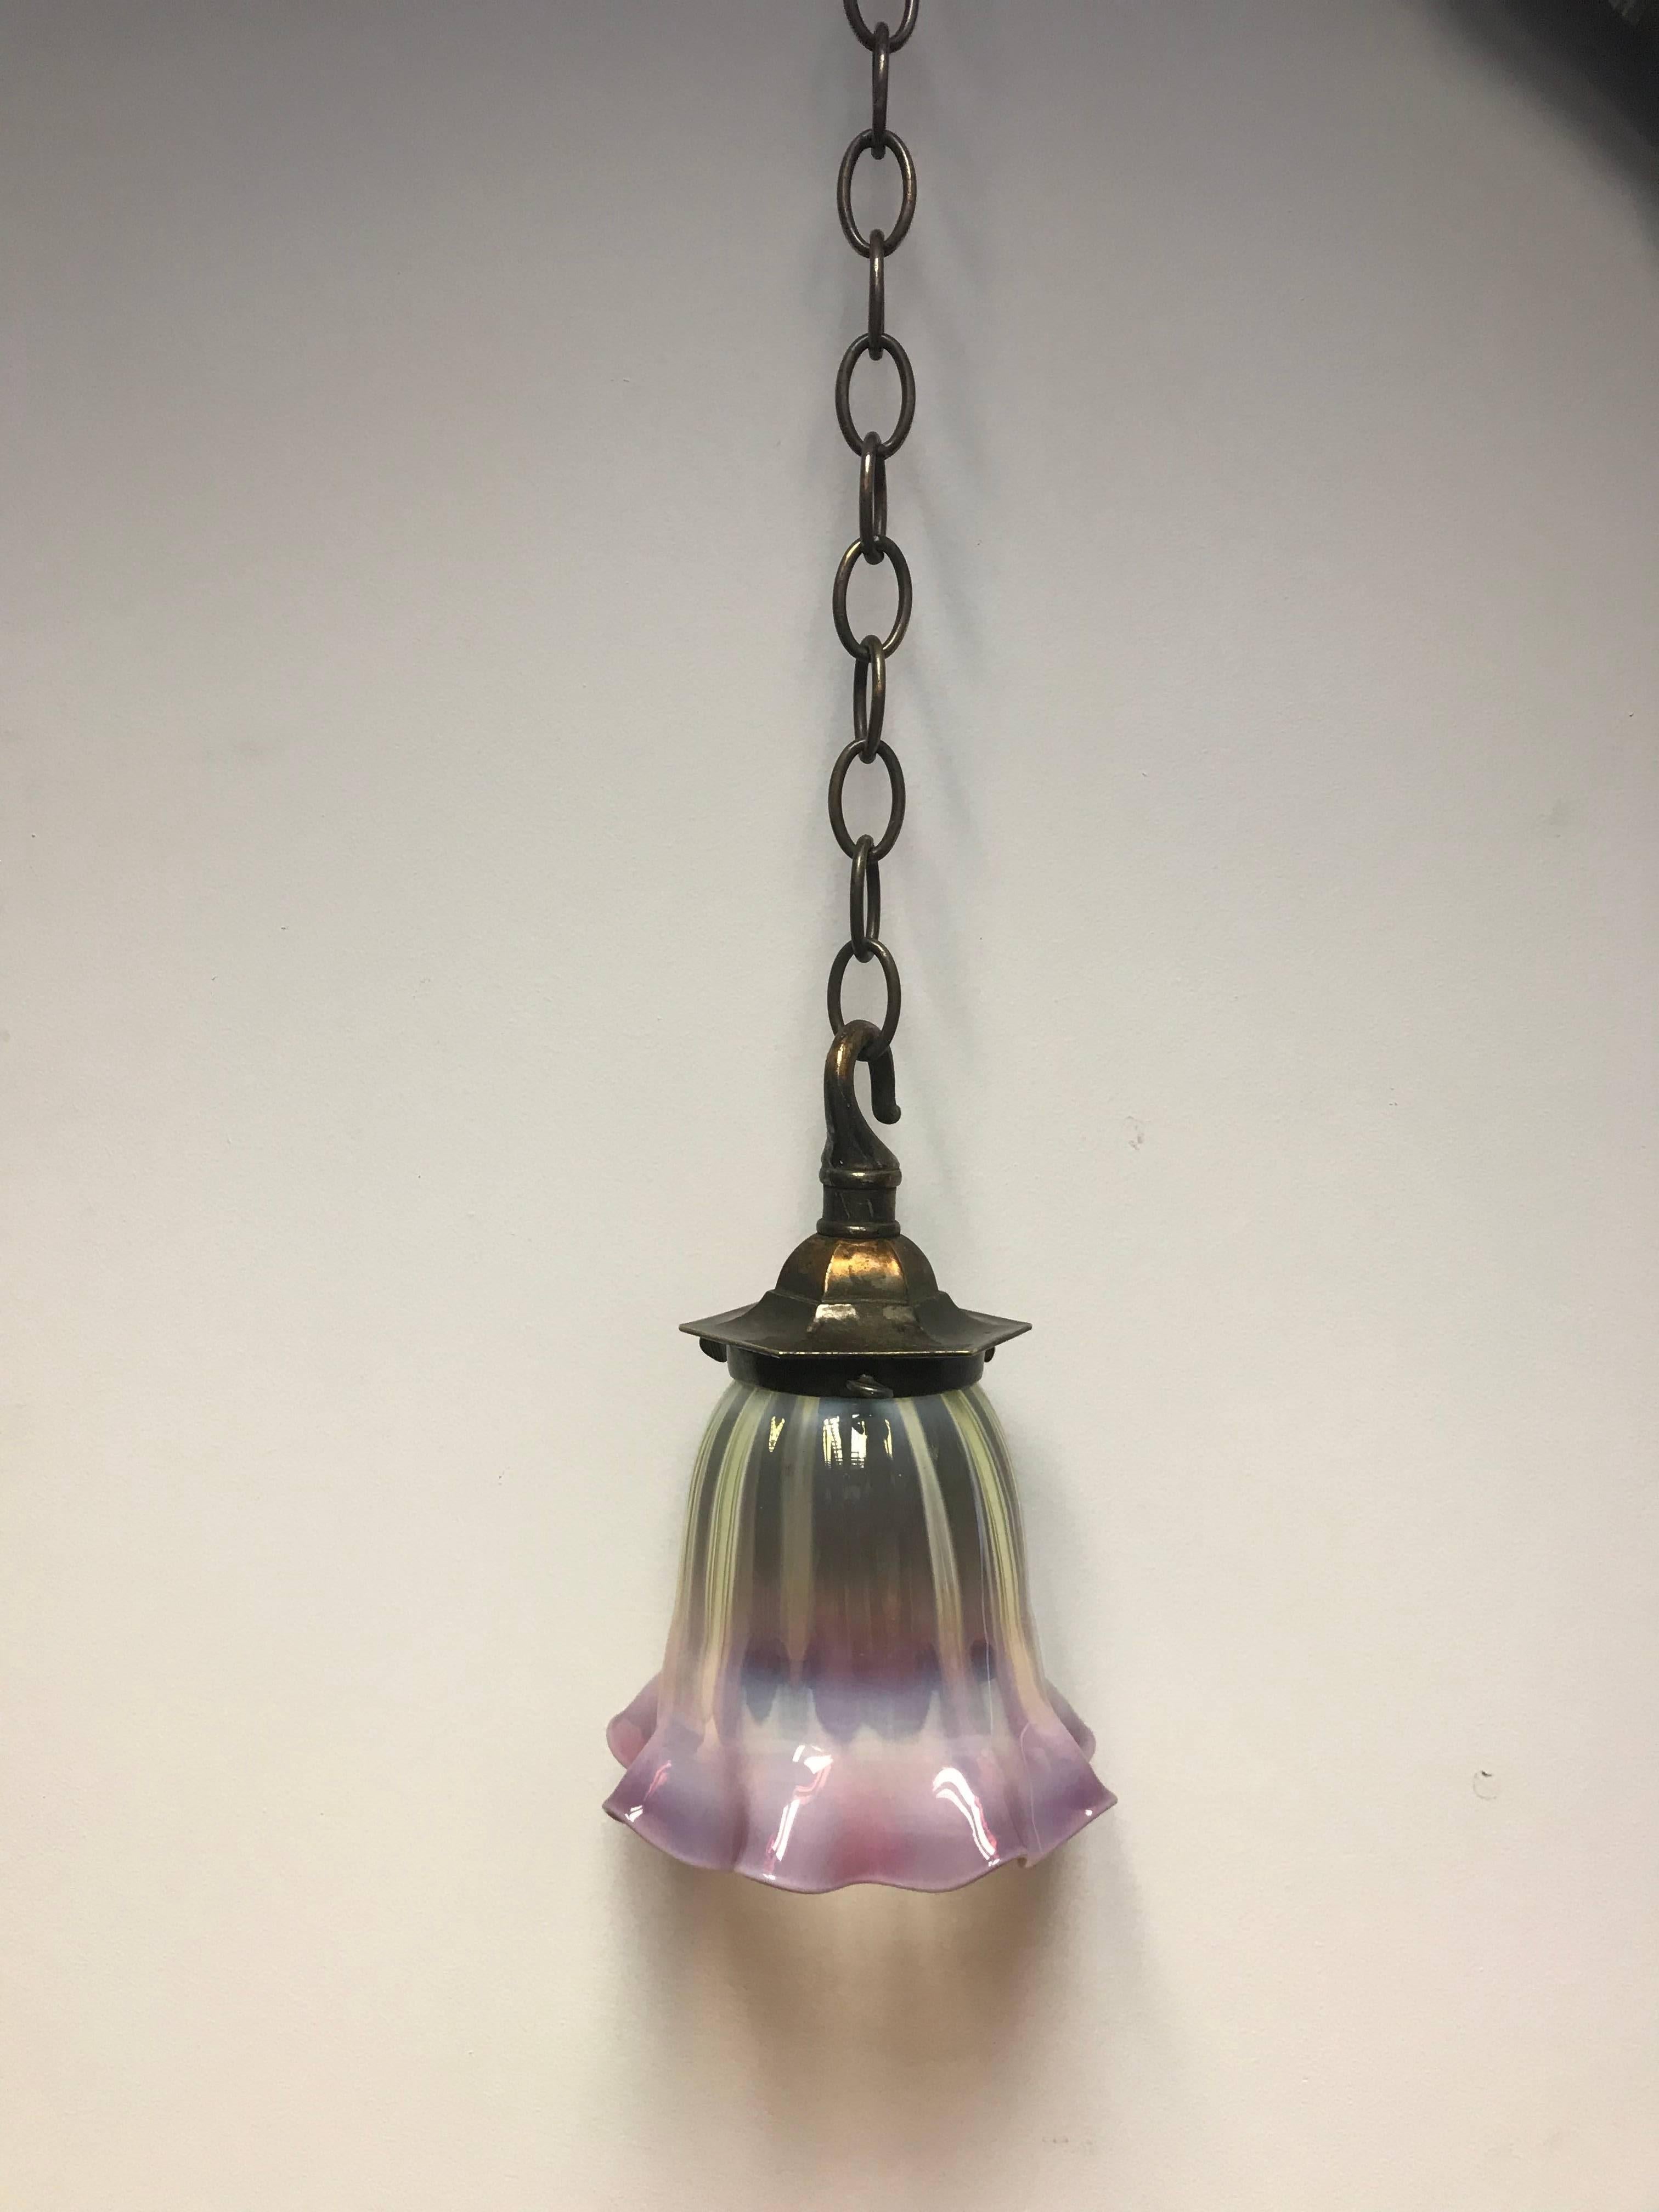 Reclaimed Edwardian copper ceiling pendant light. Complete with new glass shade in Vaseline and cranberry glass, made in the UK in the traditional method. 
The shade and gallery measures: 6